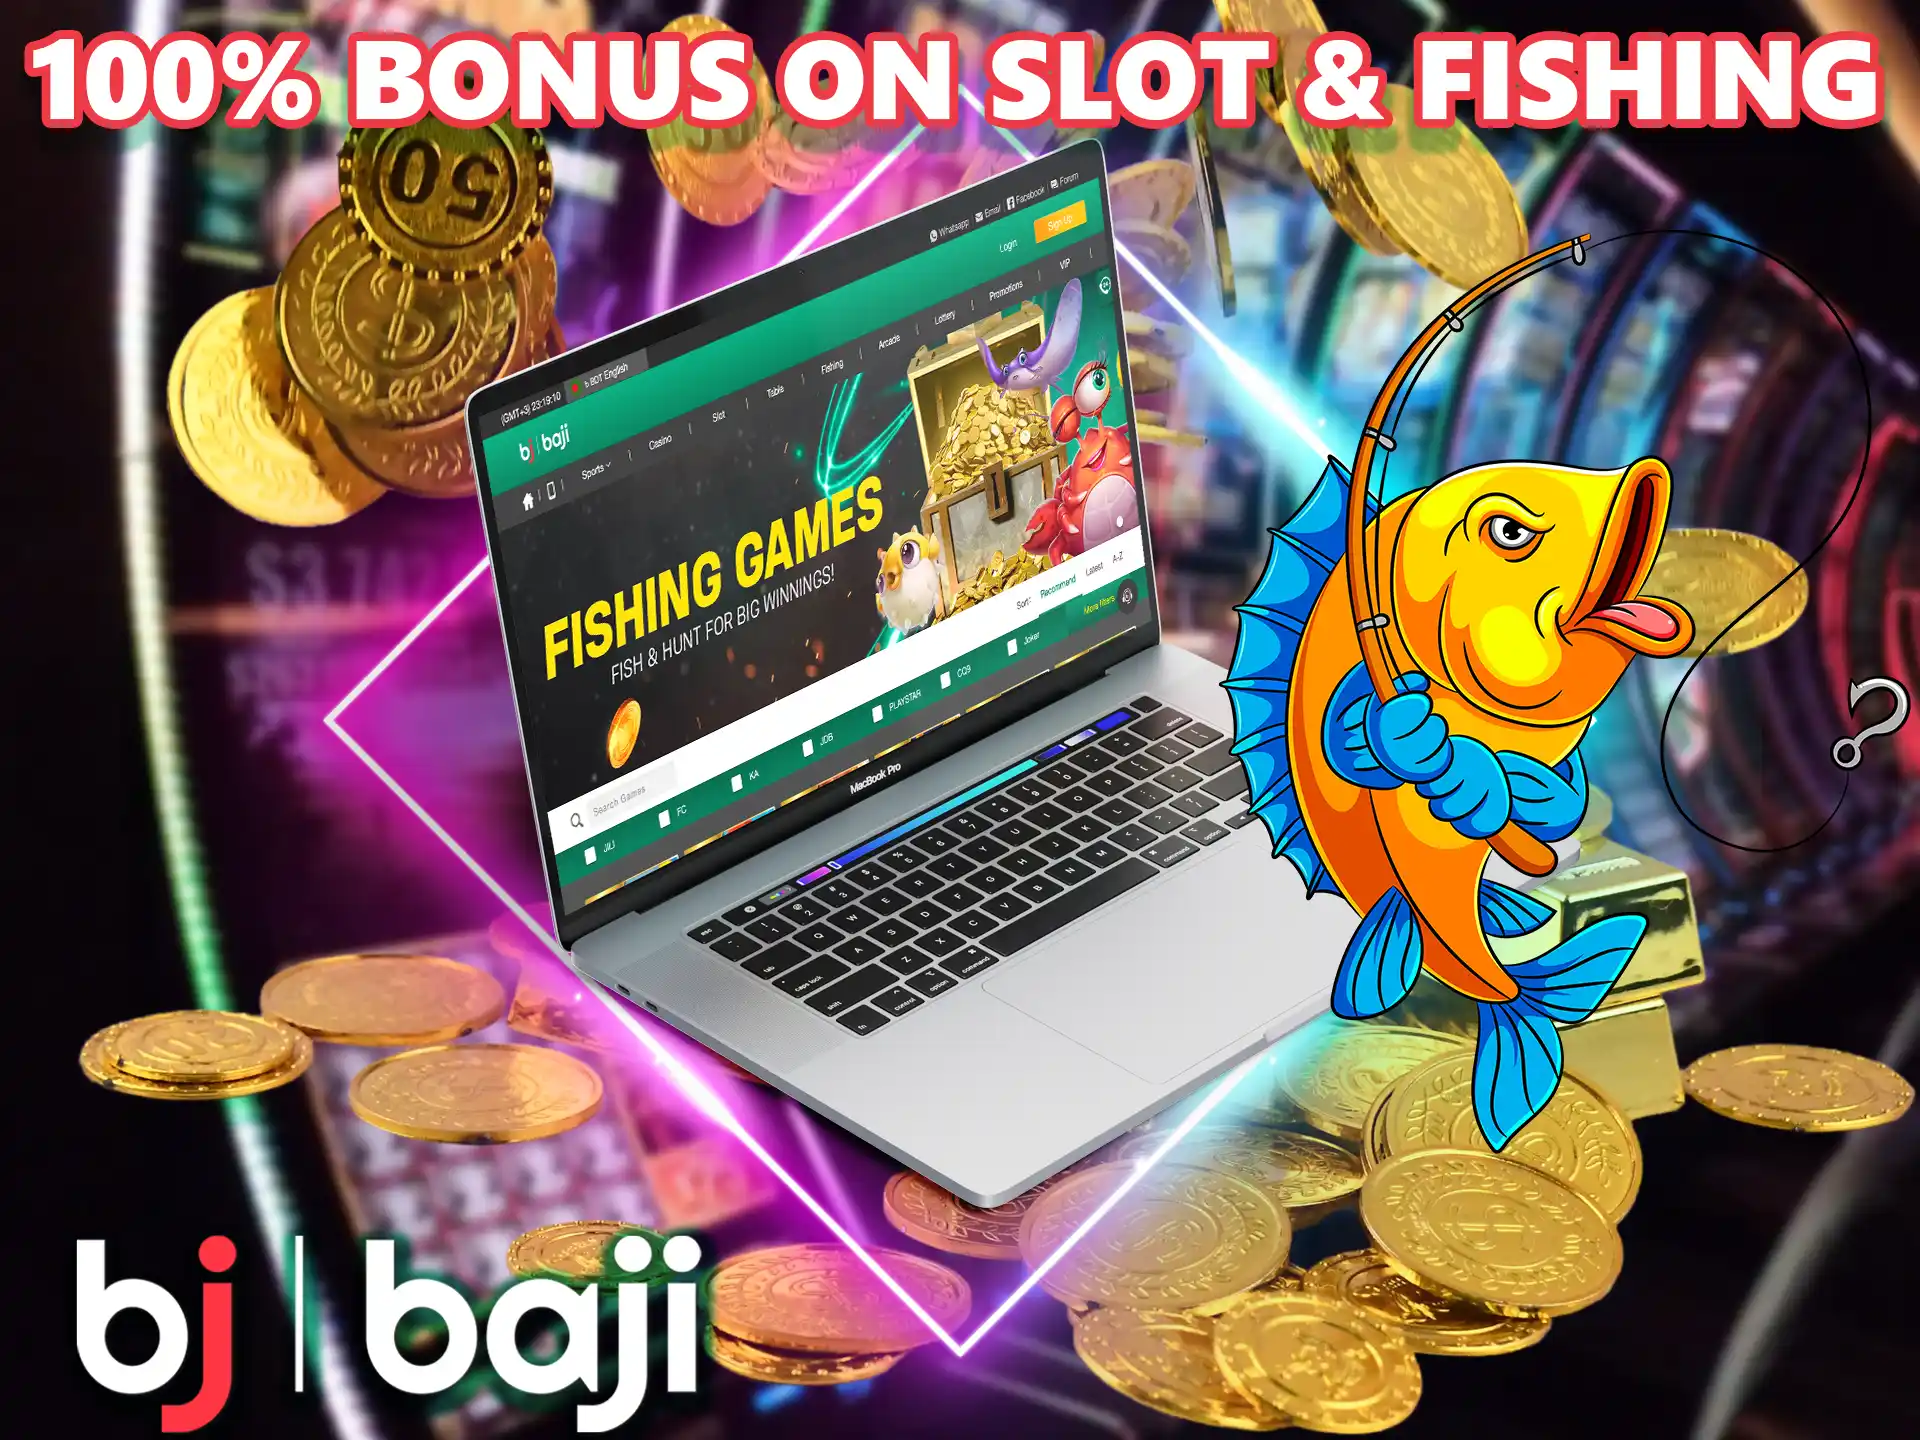 Get free bonus cash that you can use in various sections of Baji.